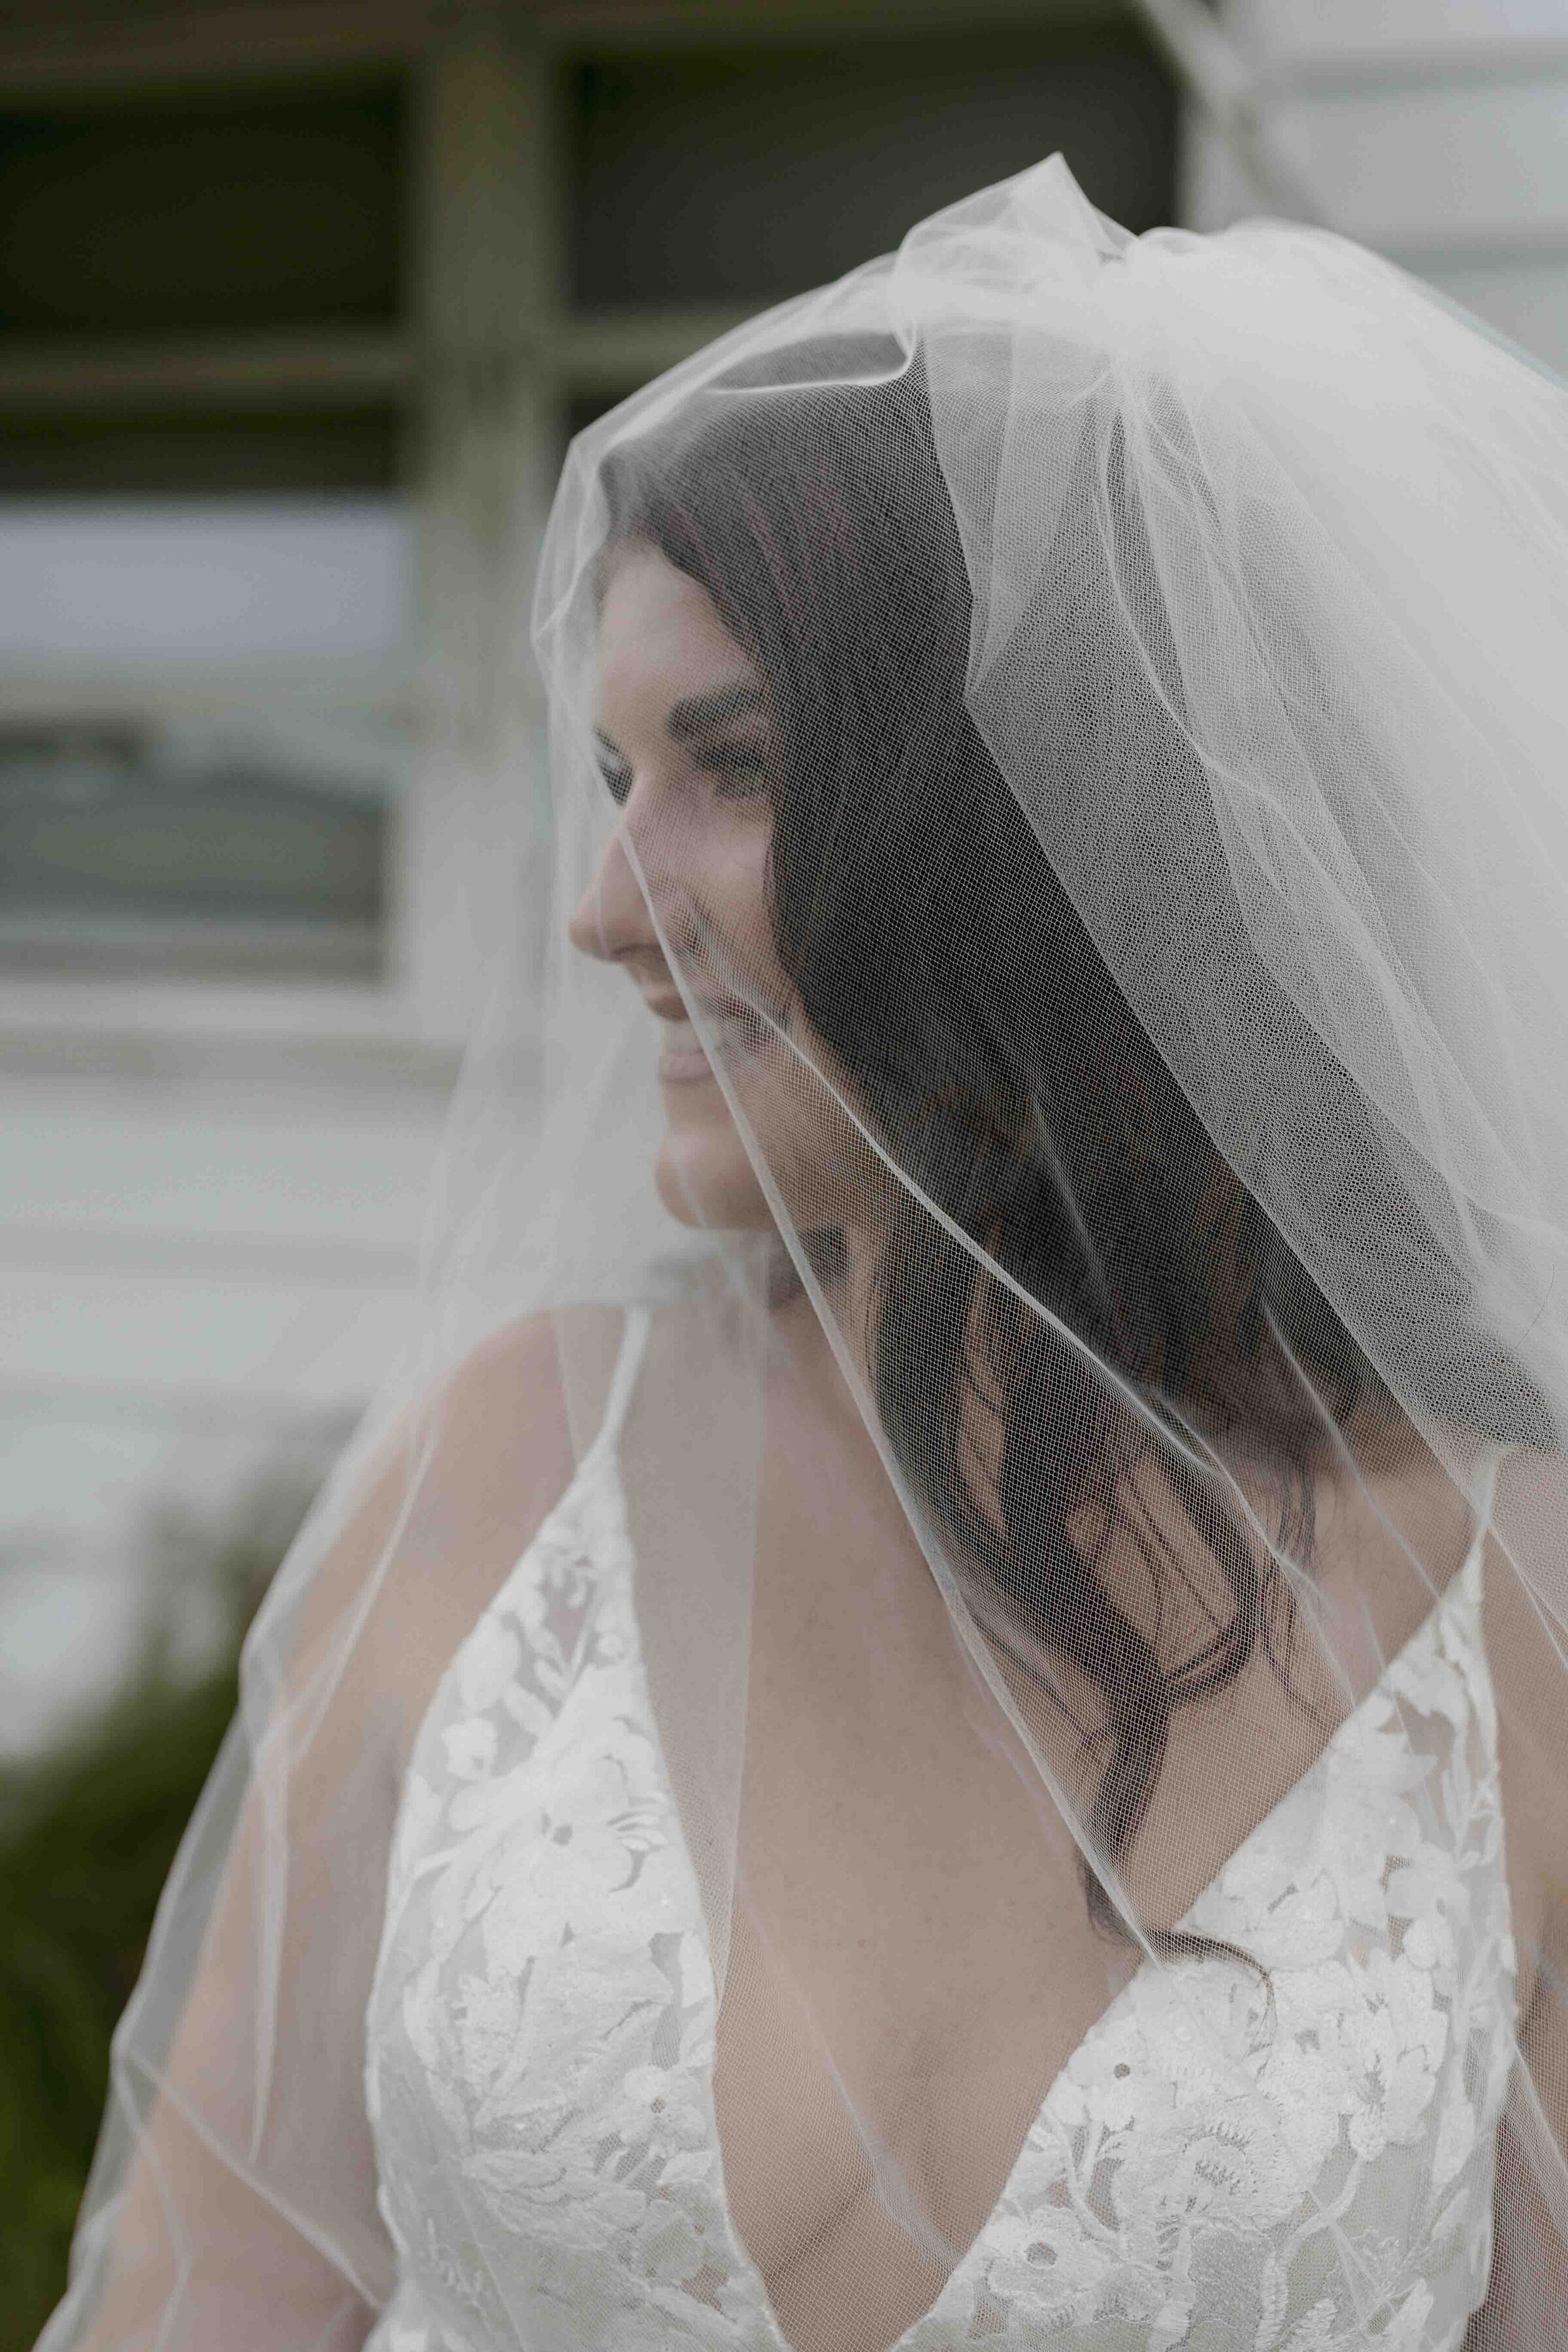 Bride wearing white dress with veil covering her face